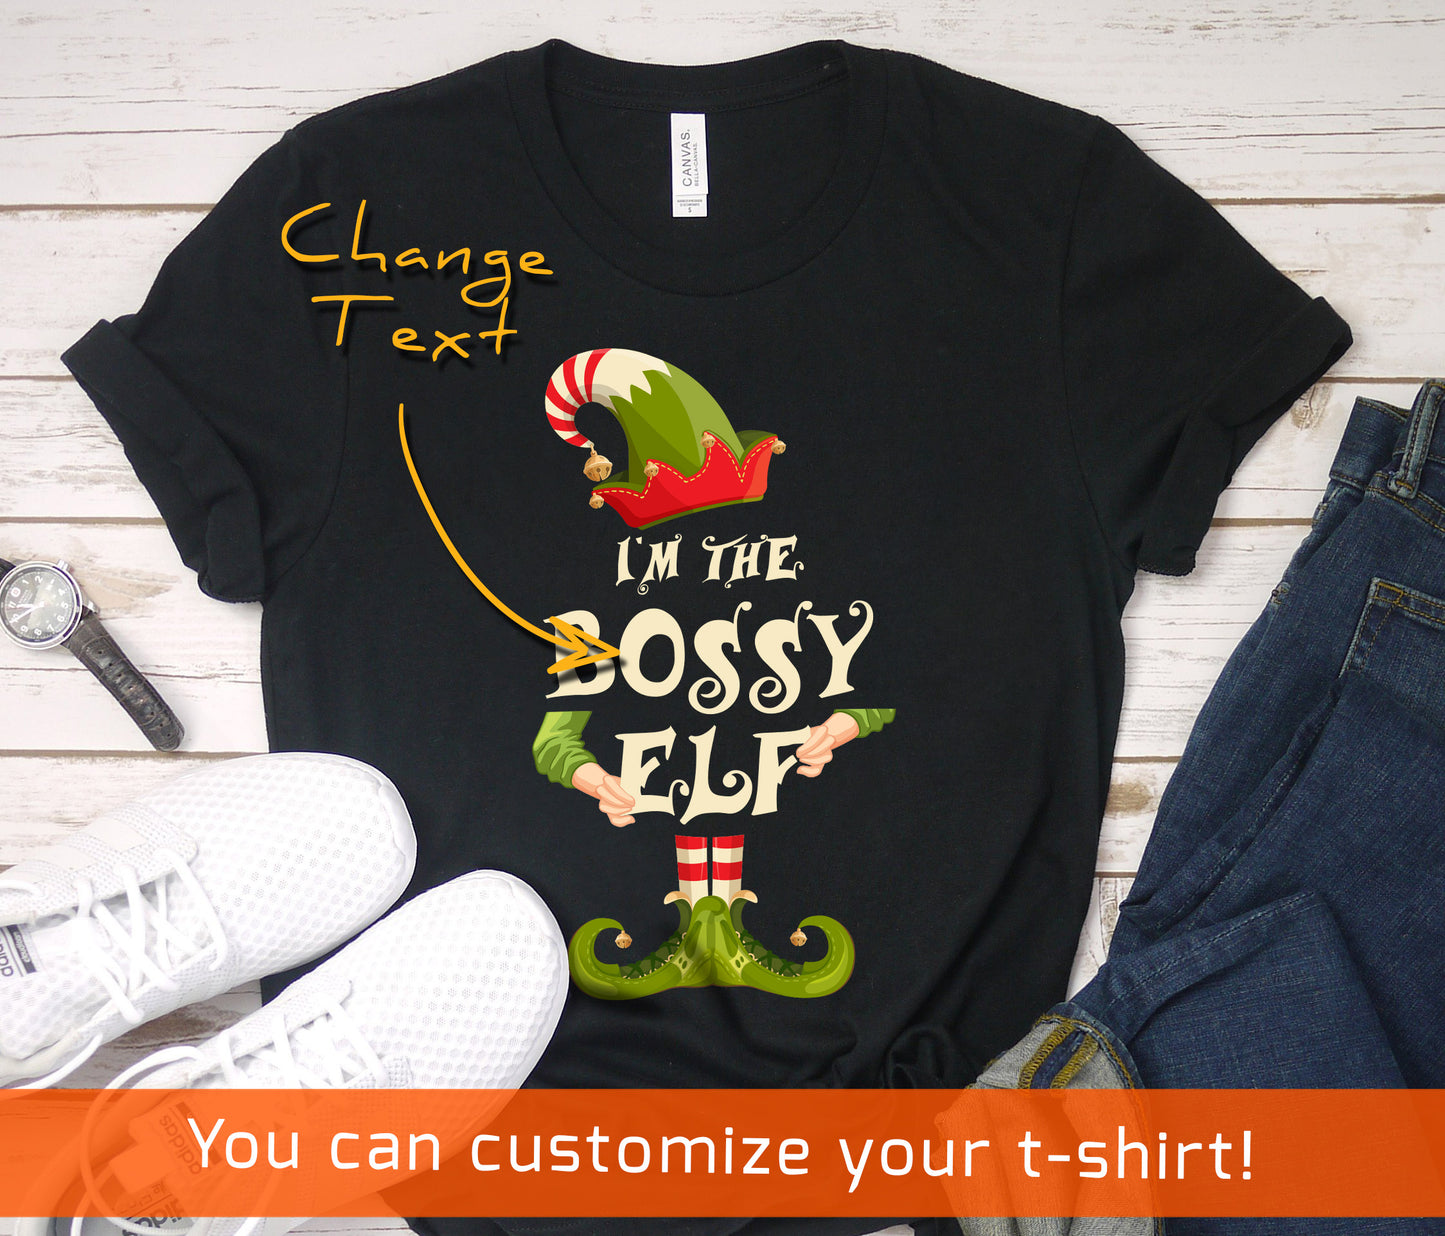 Christmas shirt for woman or man - I'm the bossy elf - family matching funny Christmas costume t-shirt - 37 Design Unit